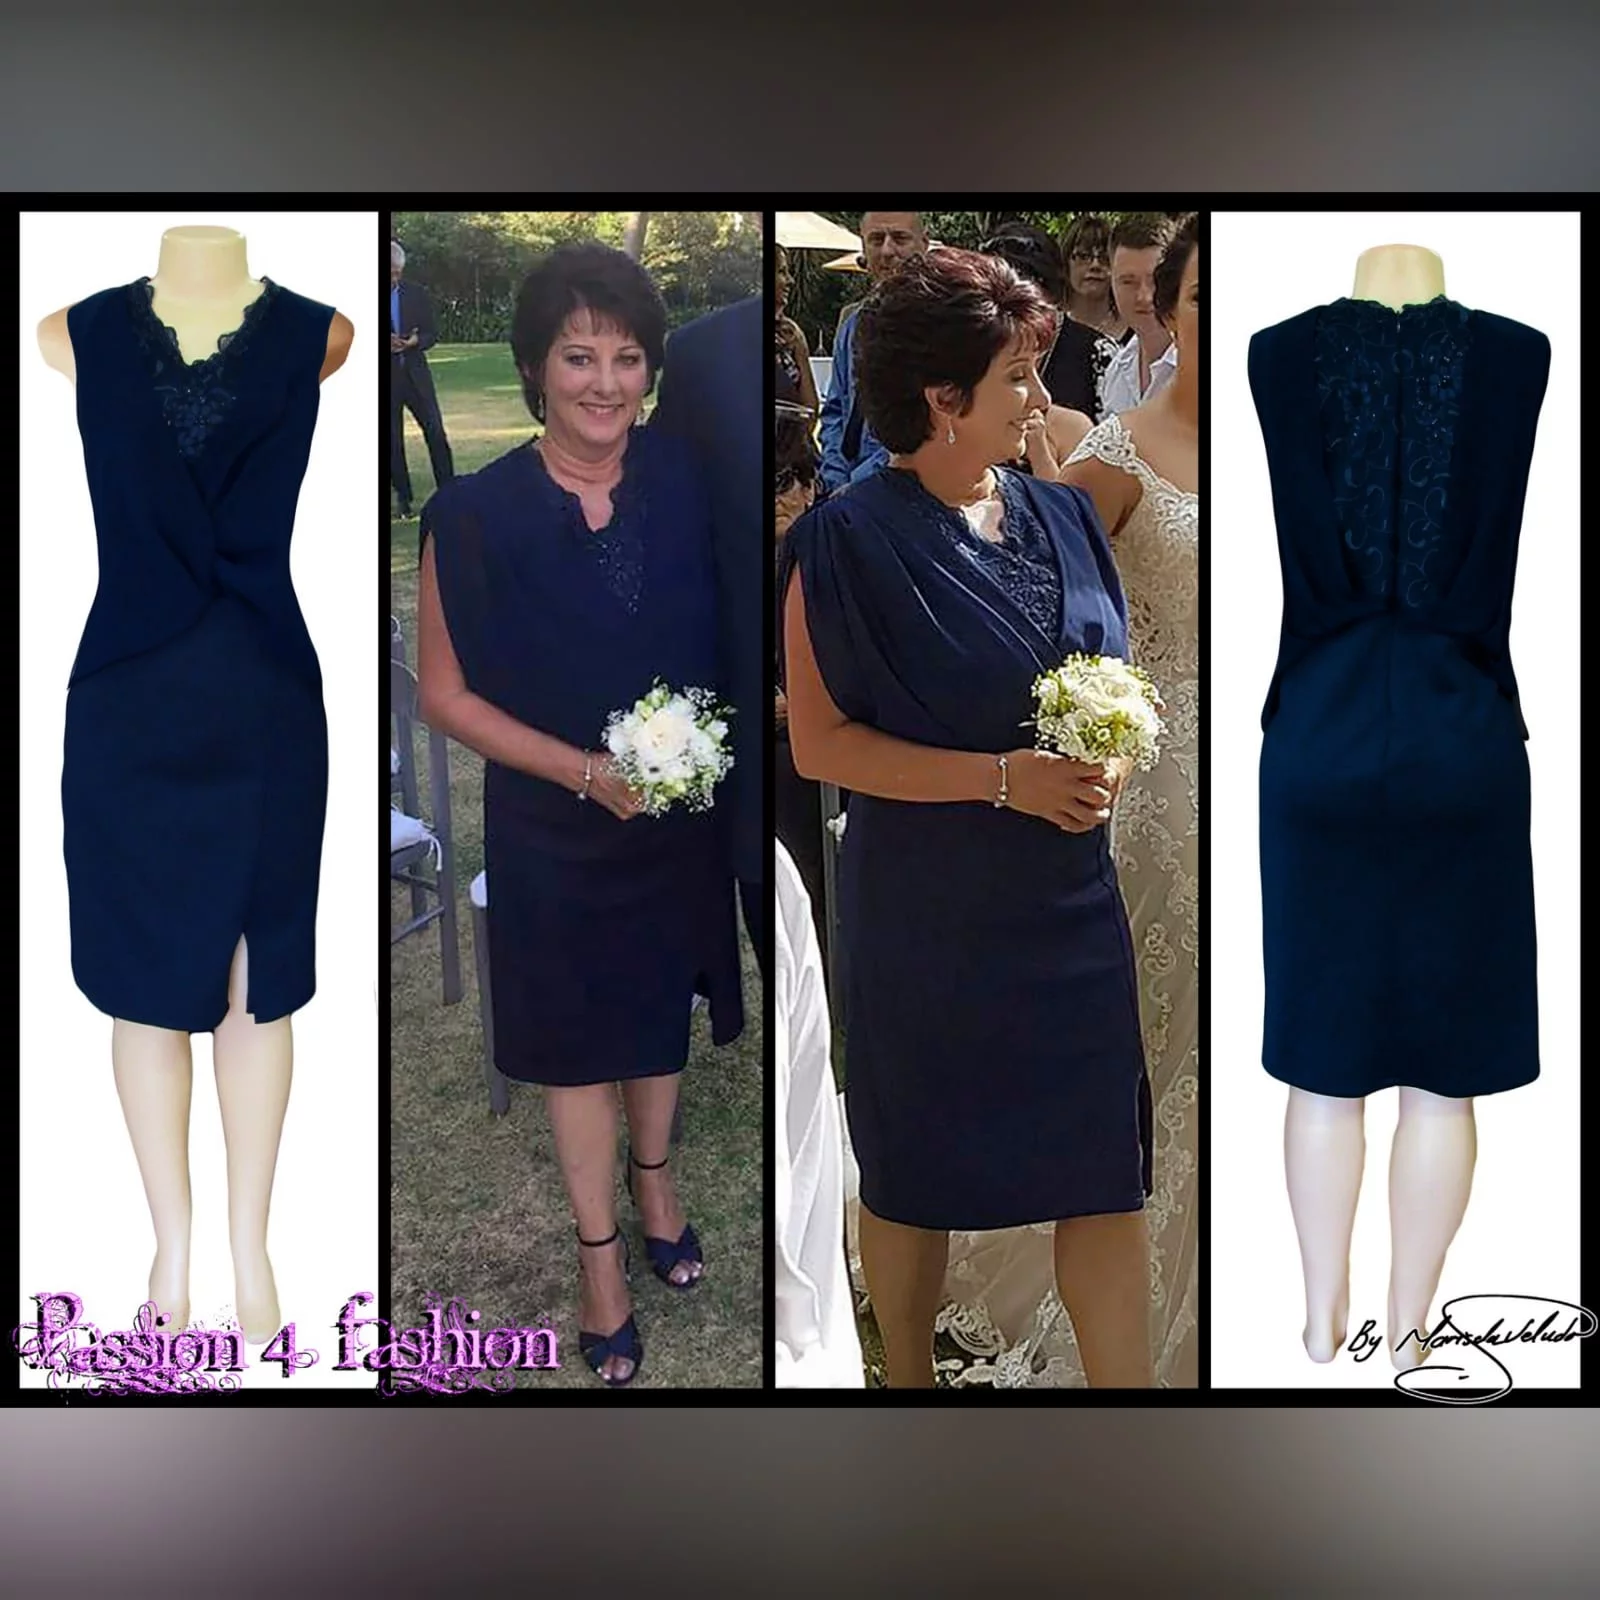 Navy blue knee length mother of the bride dress 6 navy blue knee length mother of the bride dress, fitted bottom, with a slit. Lace bodice with an overlay of pleated chiffon.